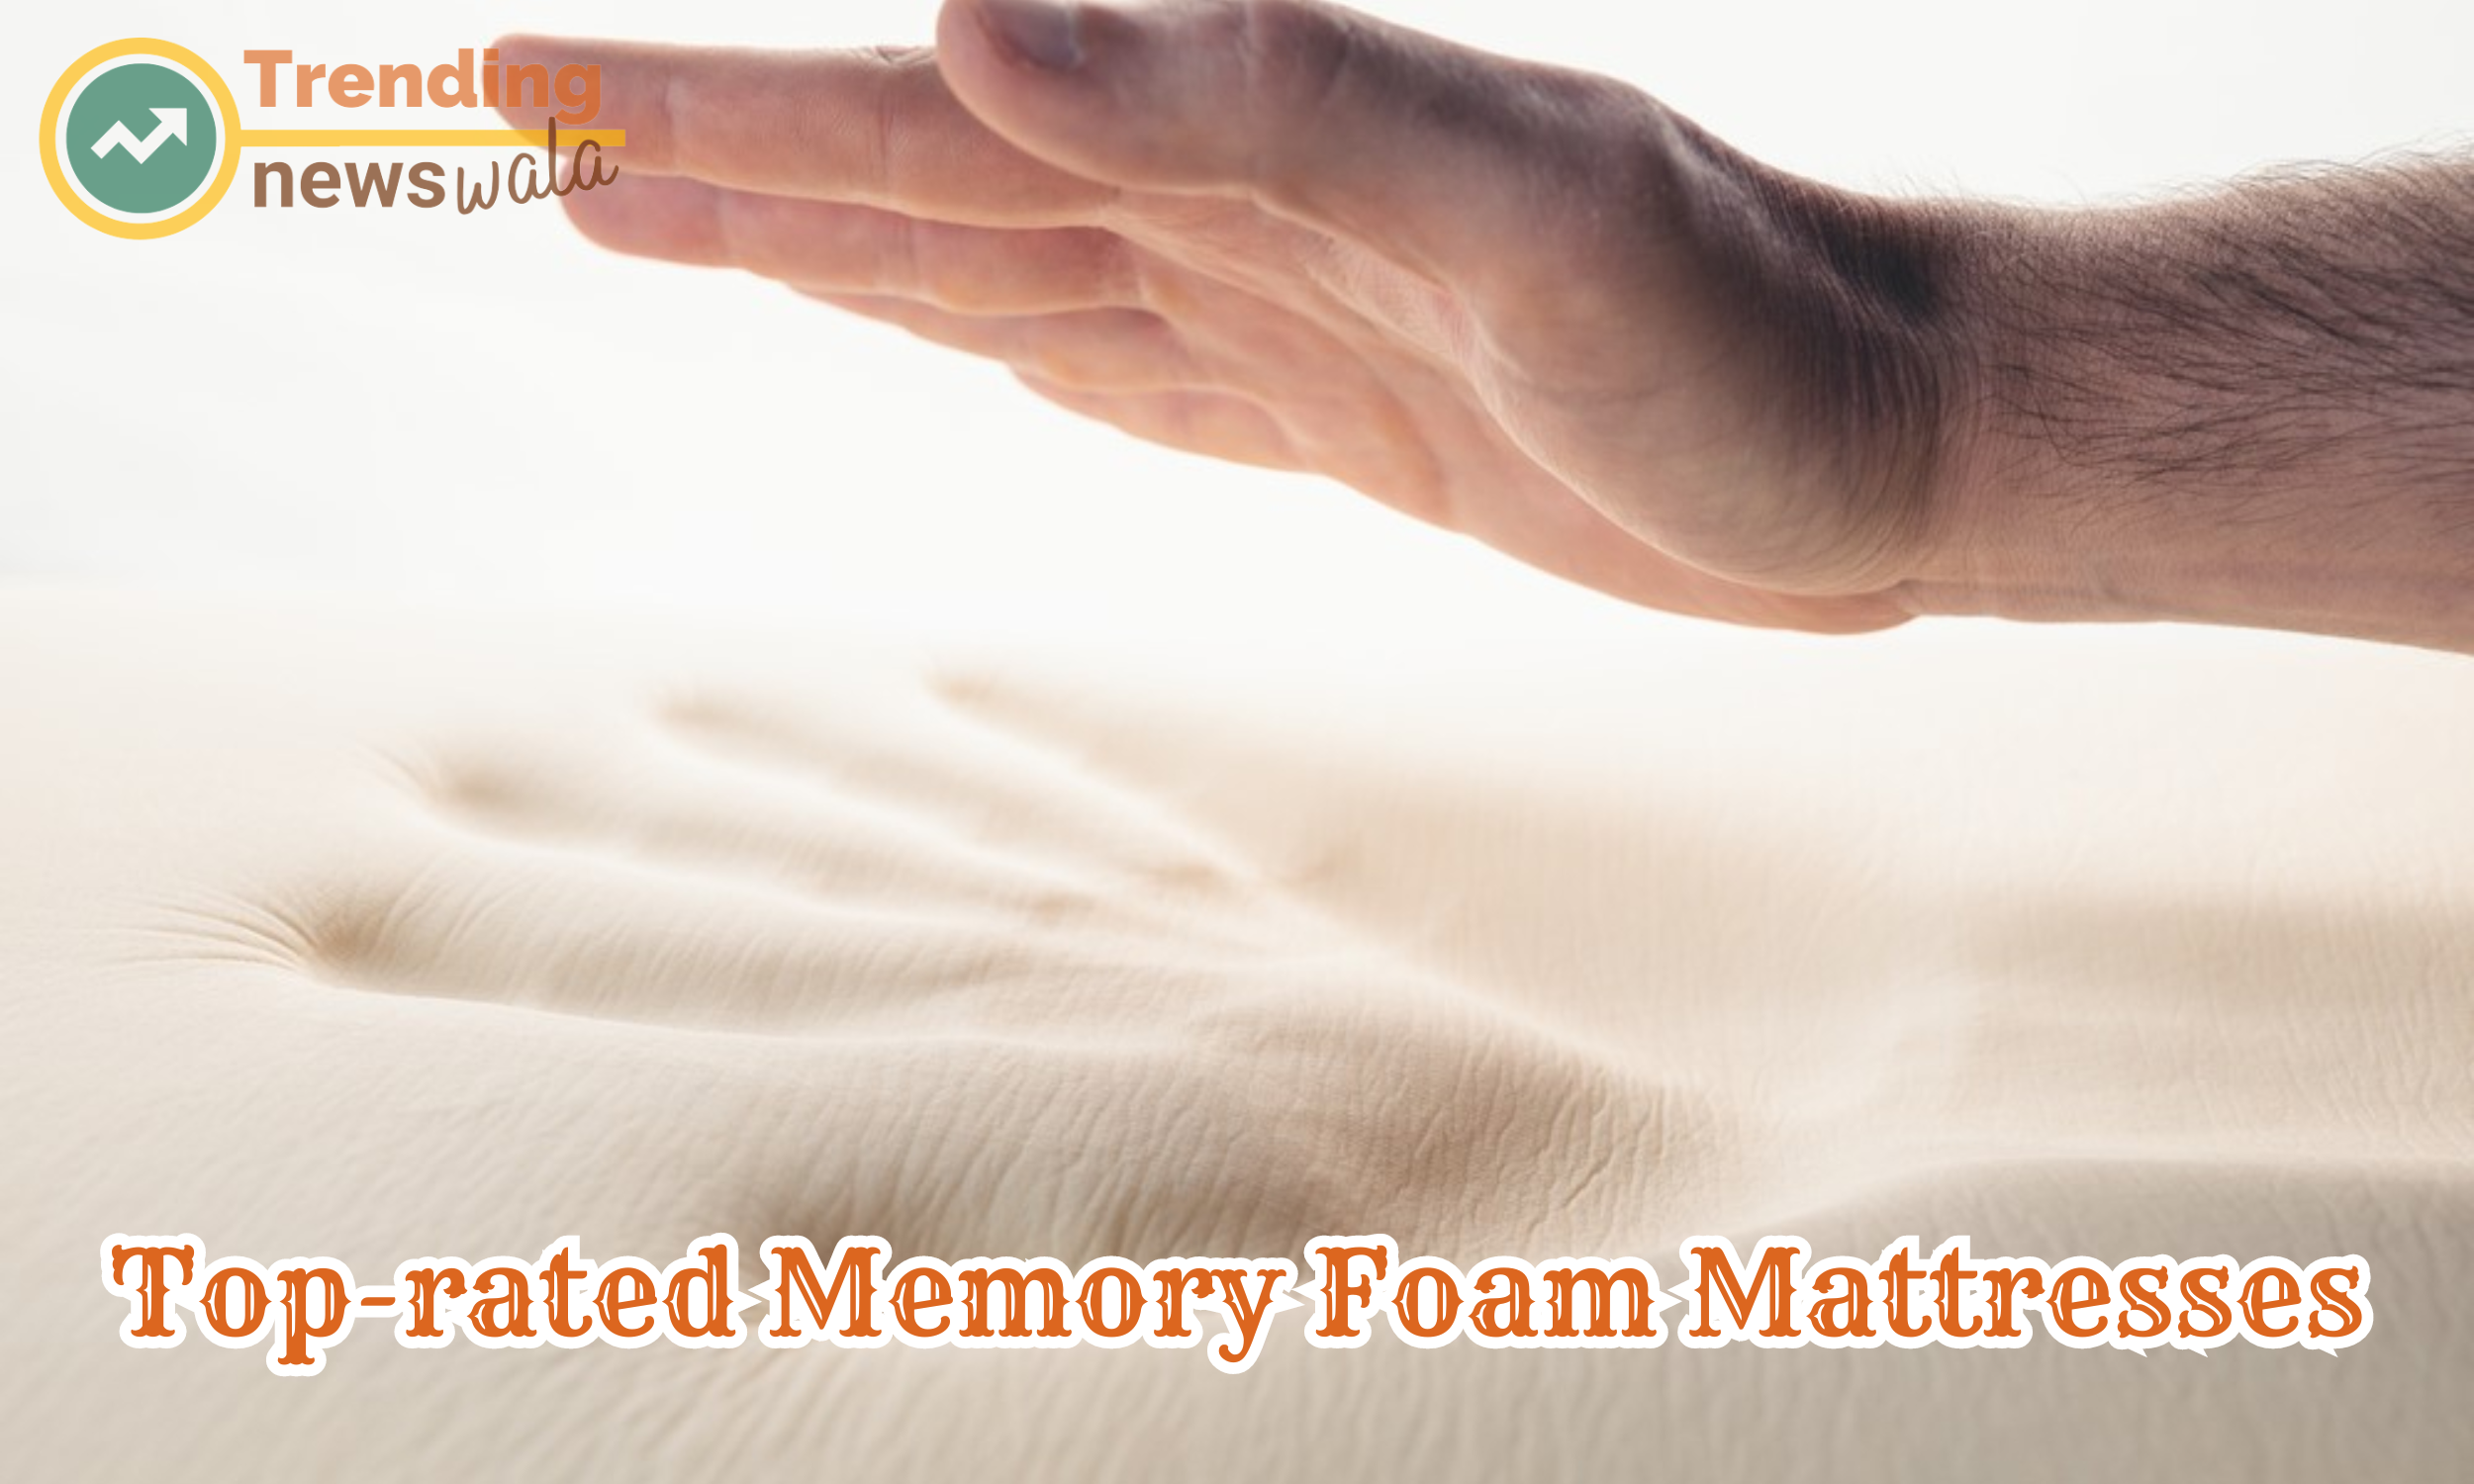 Contribute to the recognition of memory foam mattresses as top-rated